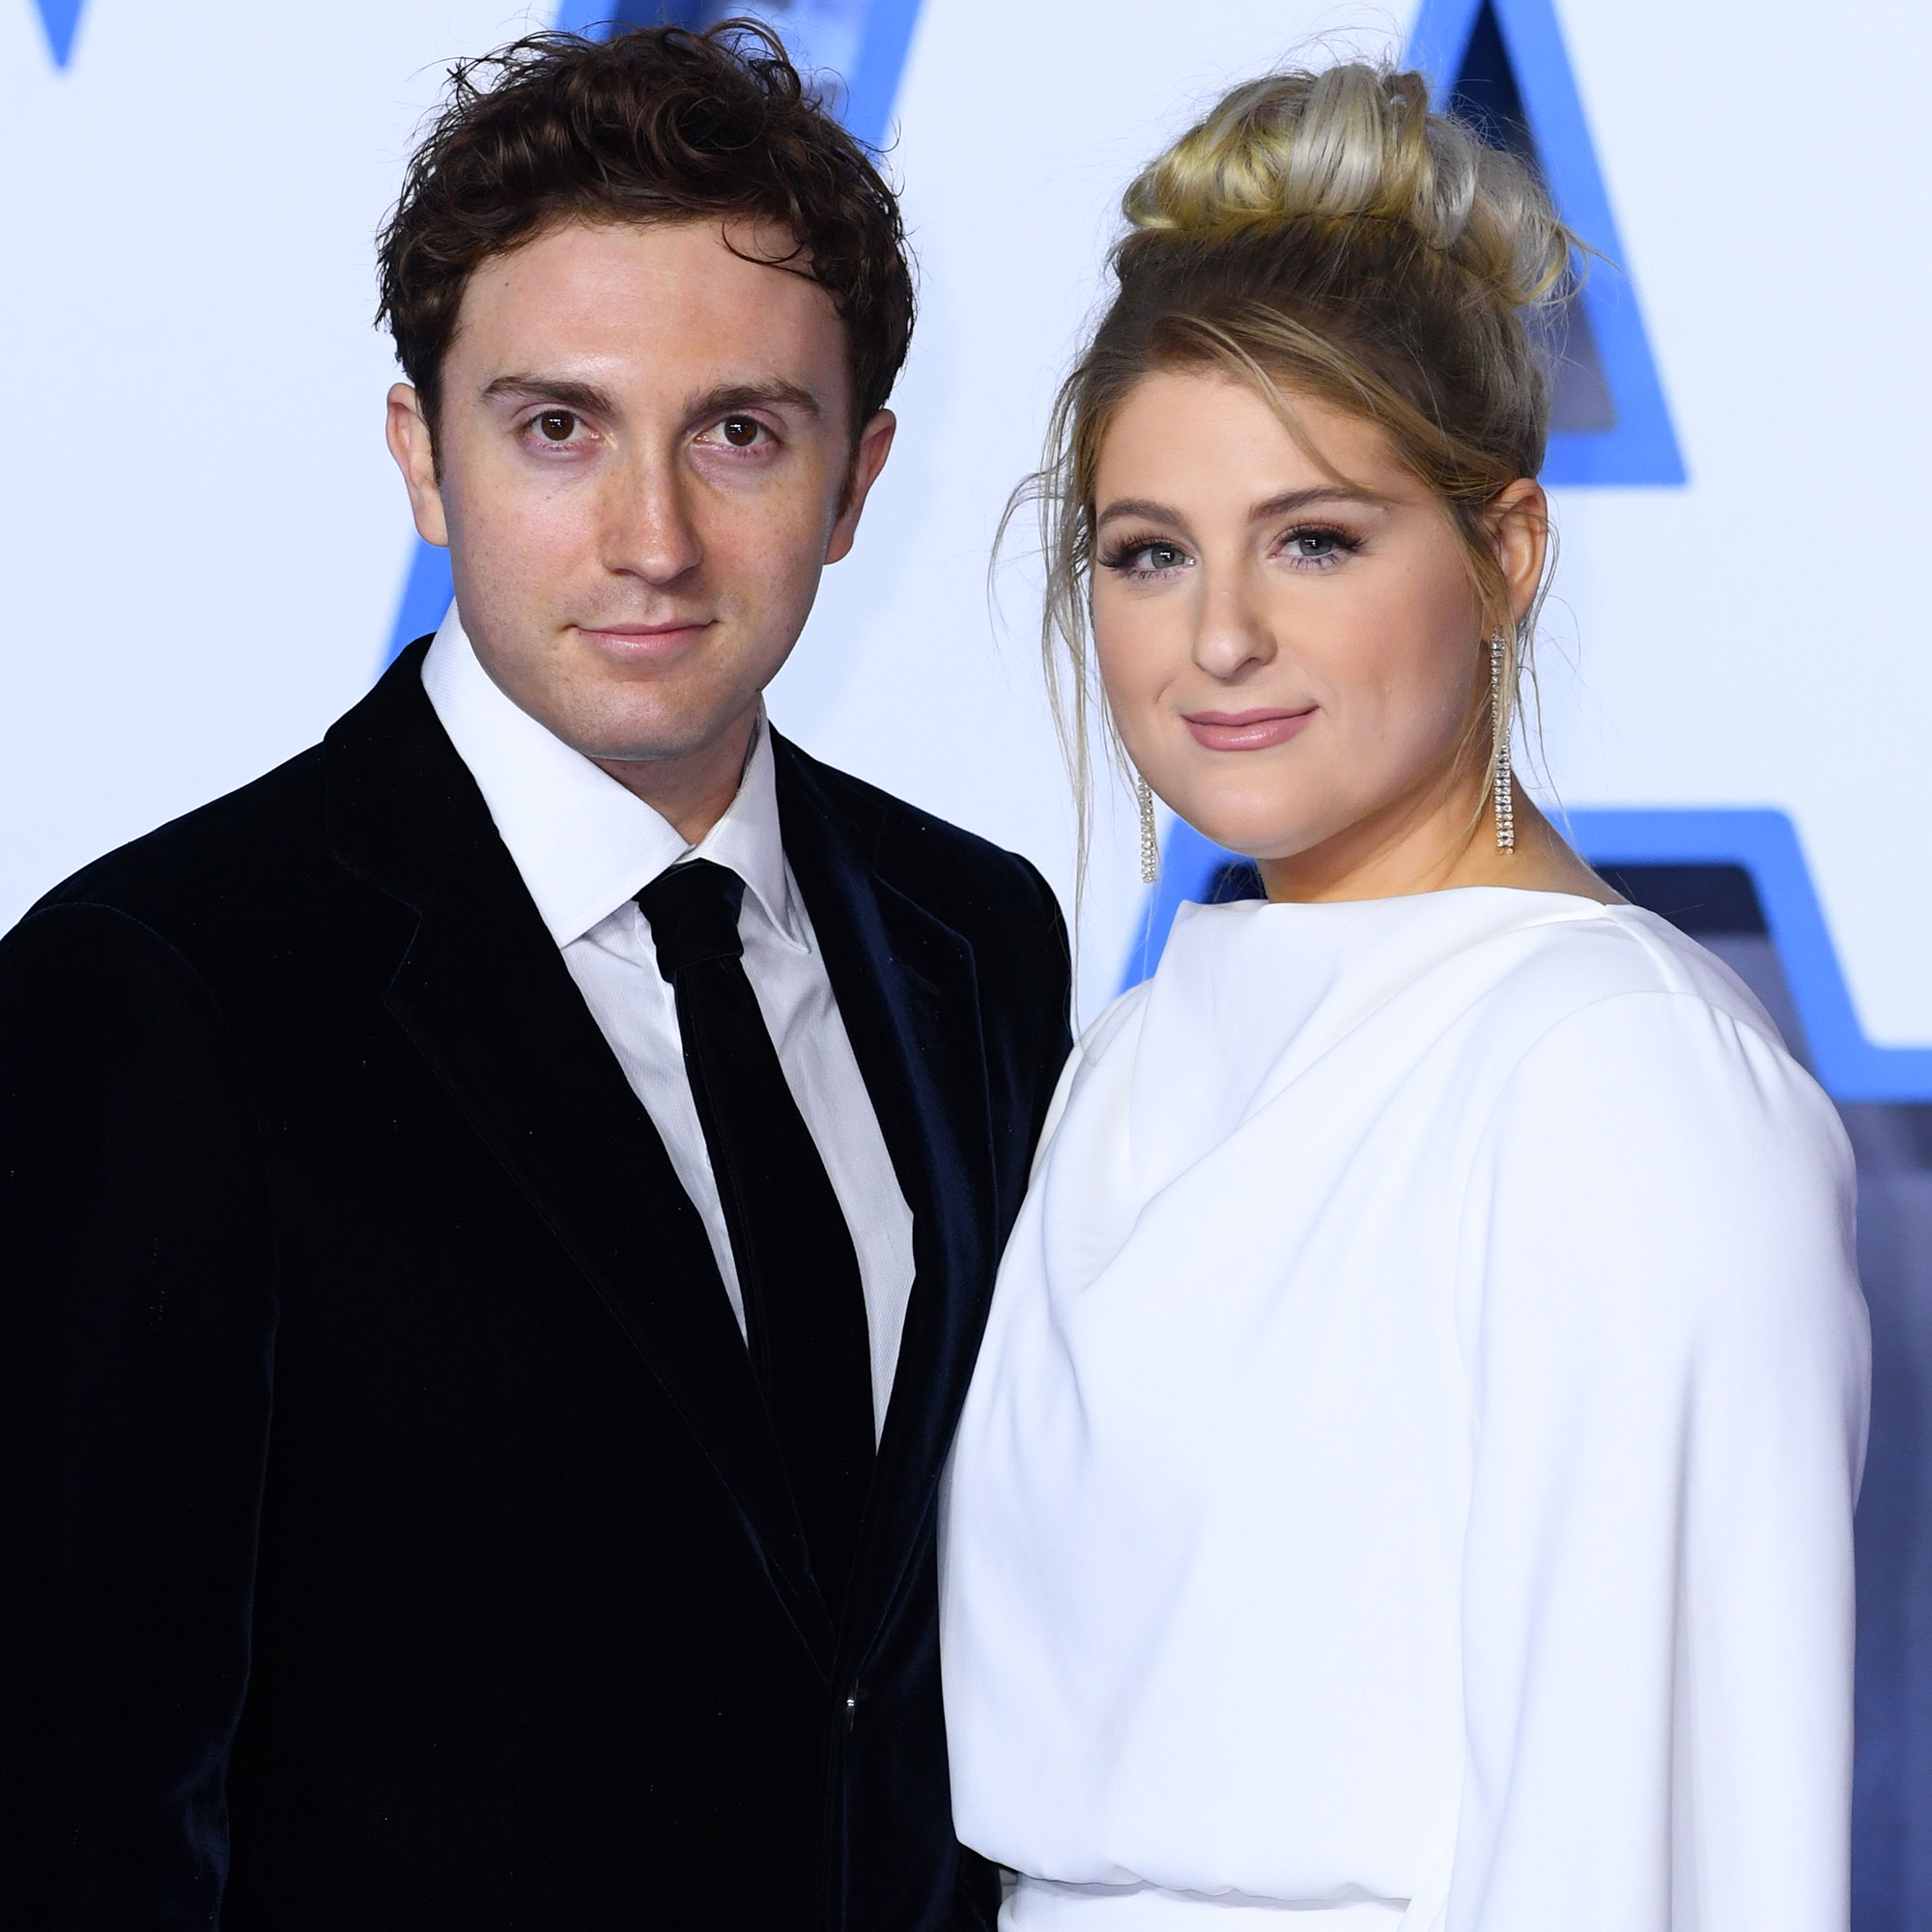 Meghan Trainor And Daryl Sabara Talk About Shaving While Pregnant